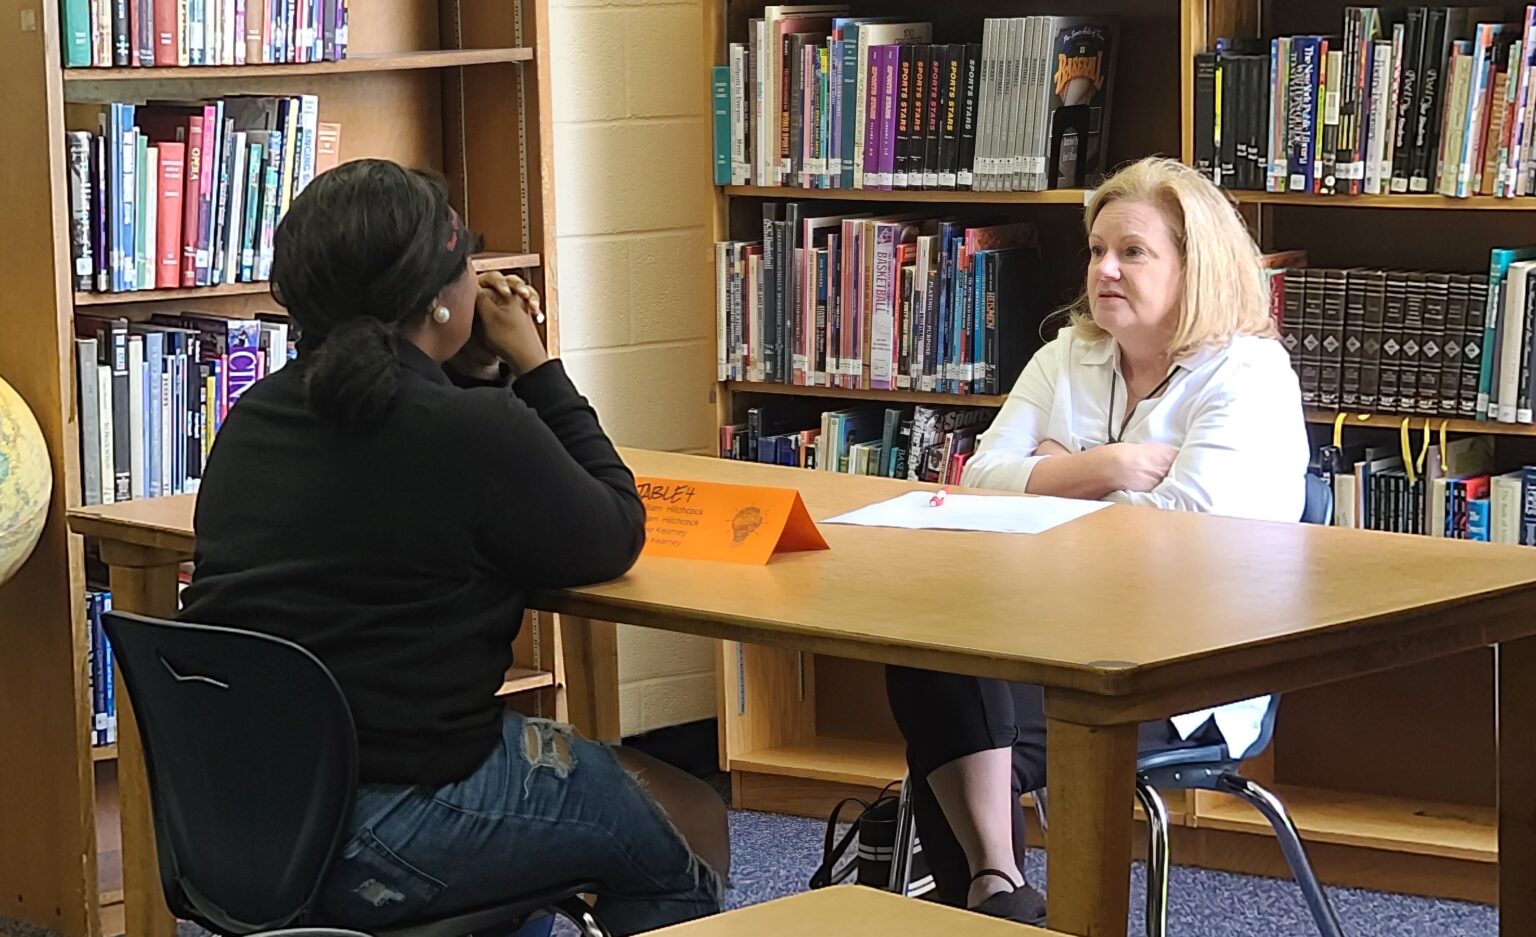 Wilson Education Partnership builds relationships between students and community